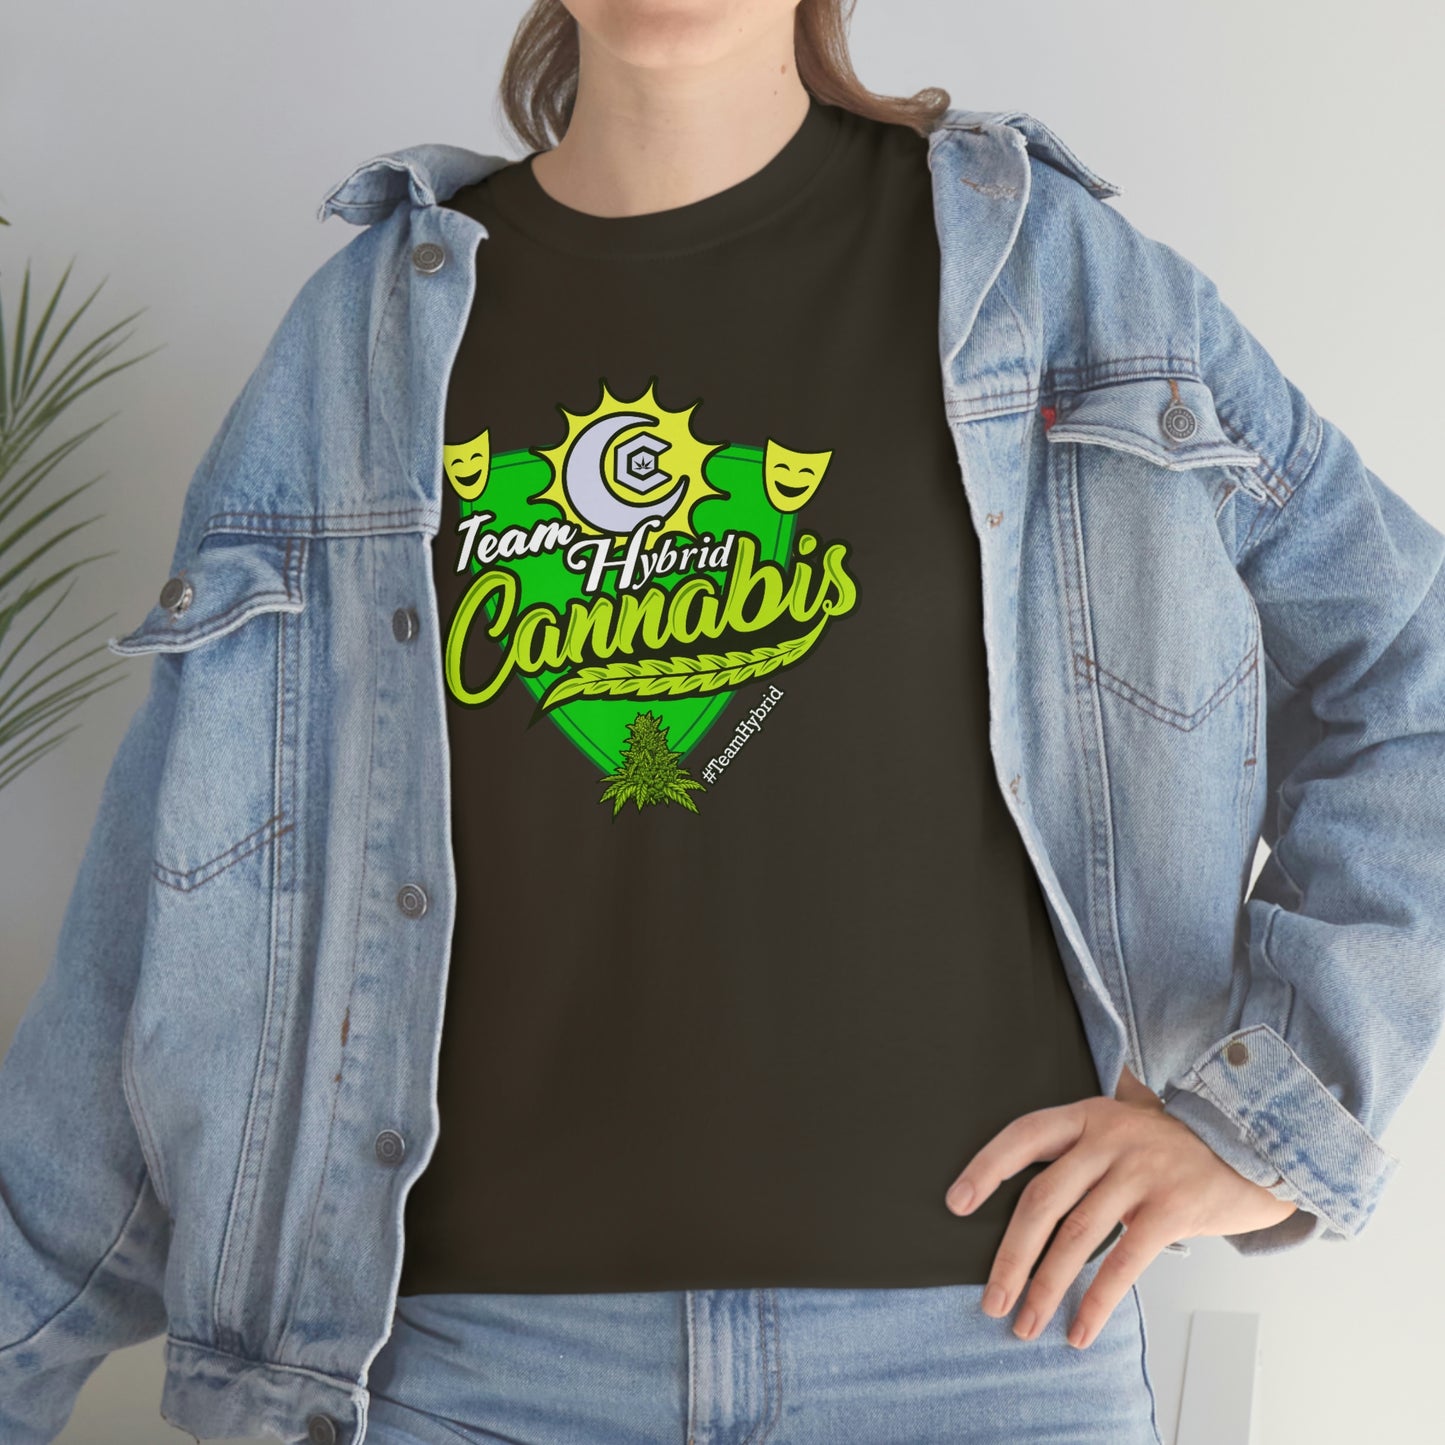 a woman wearing a Team Hybrid Cannabis T-Shirt with a green flower on it.